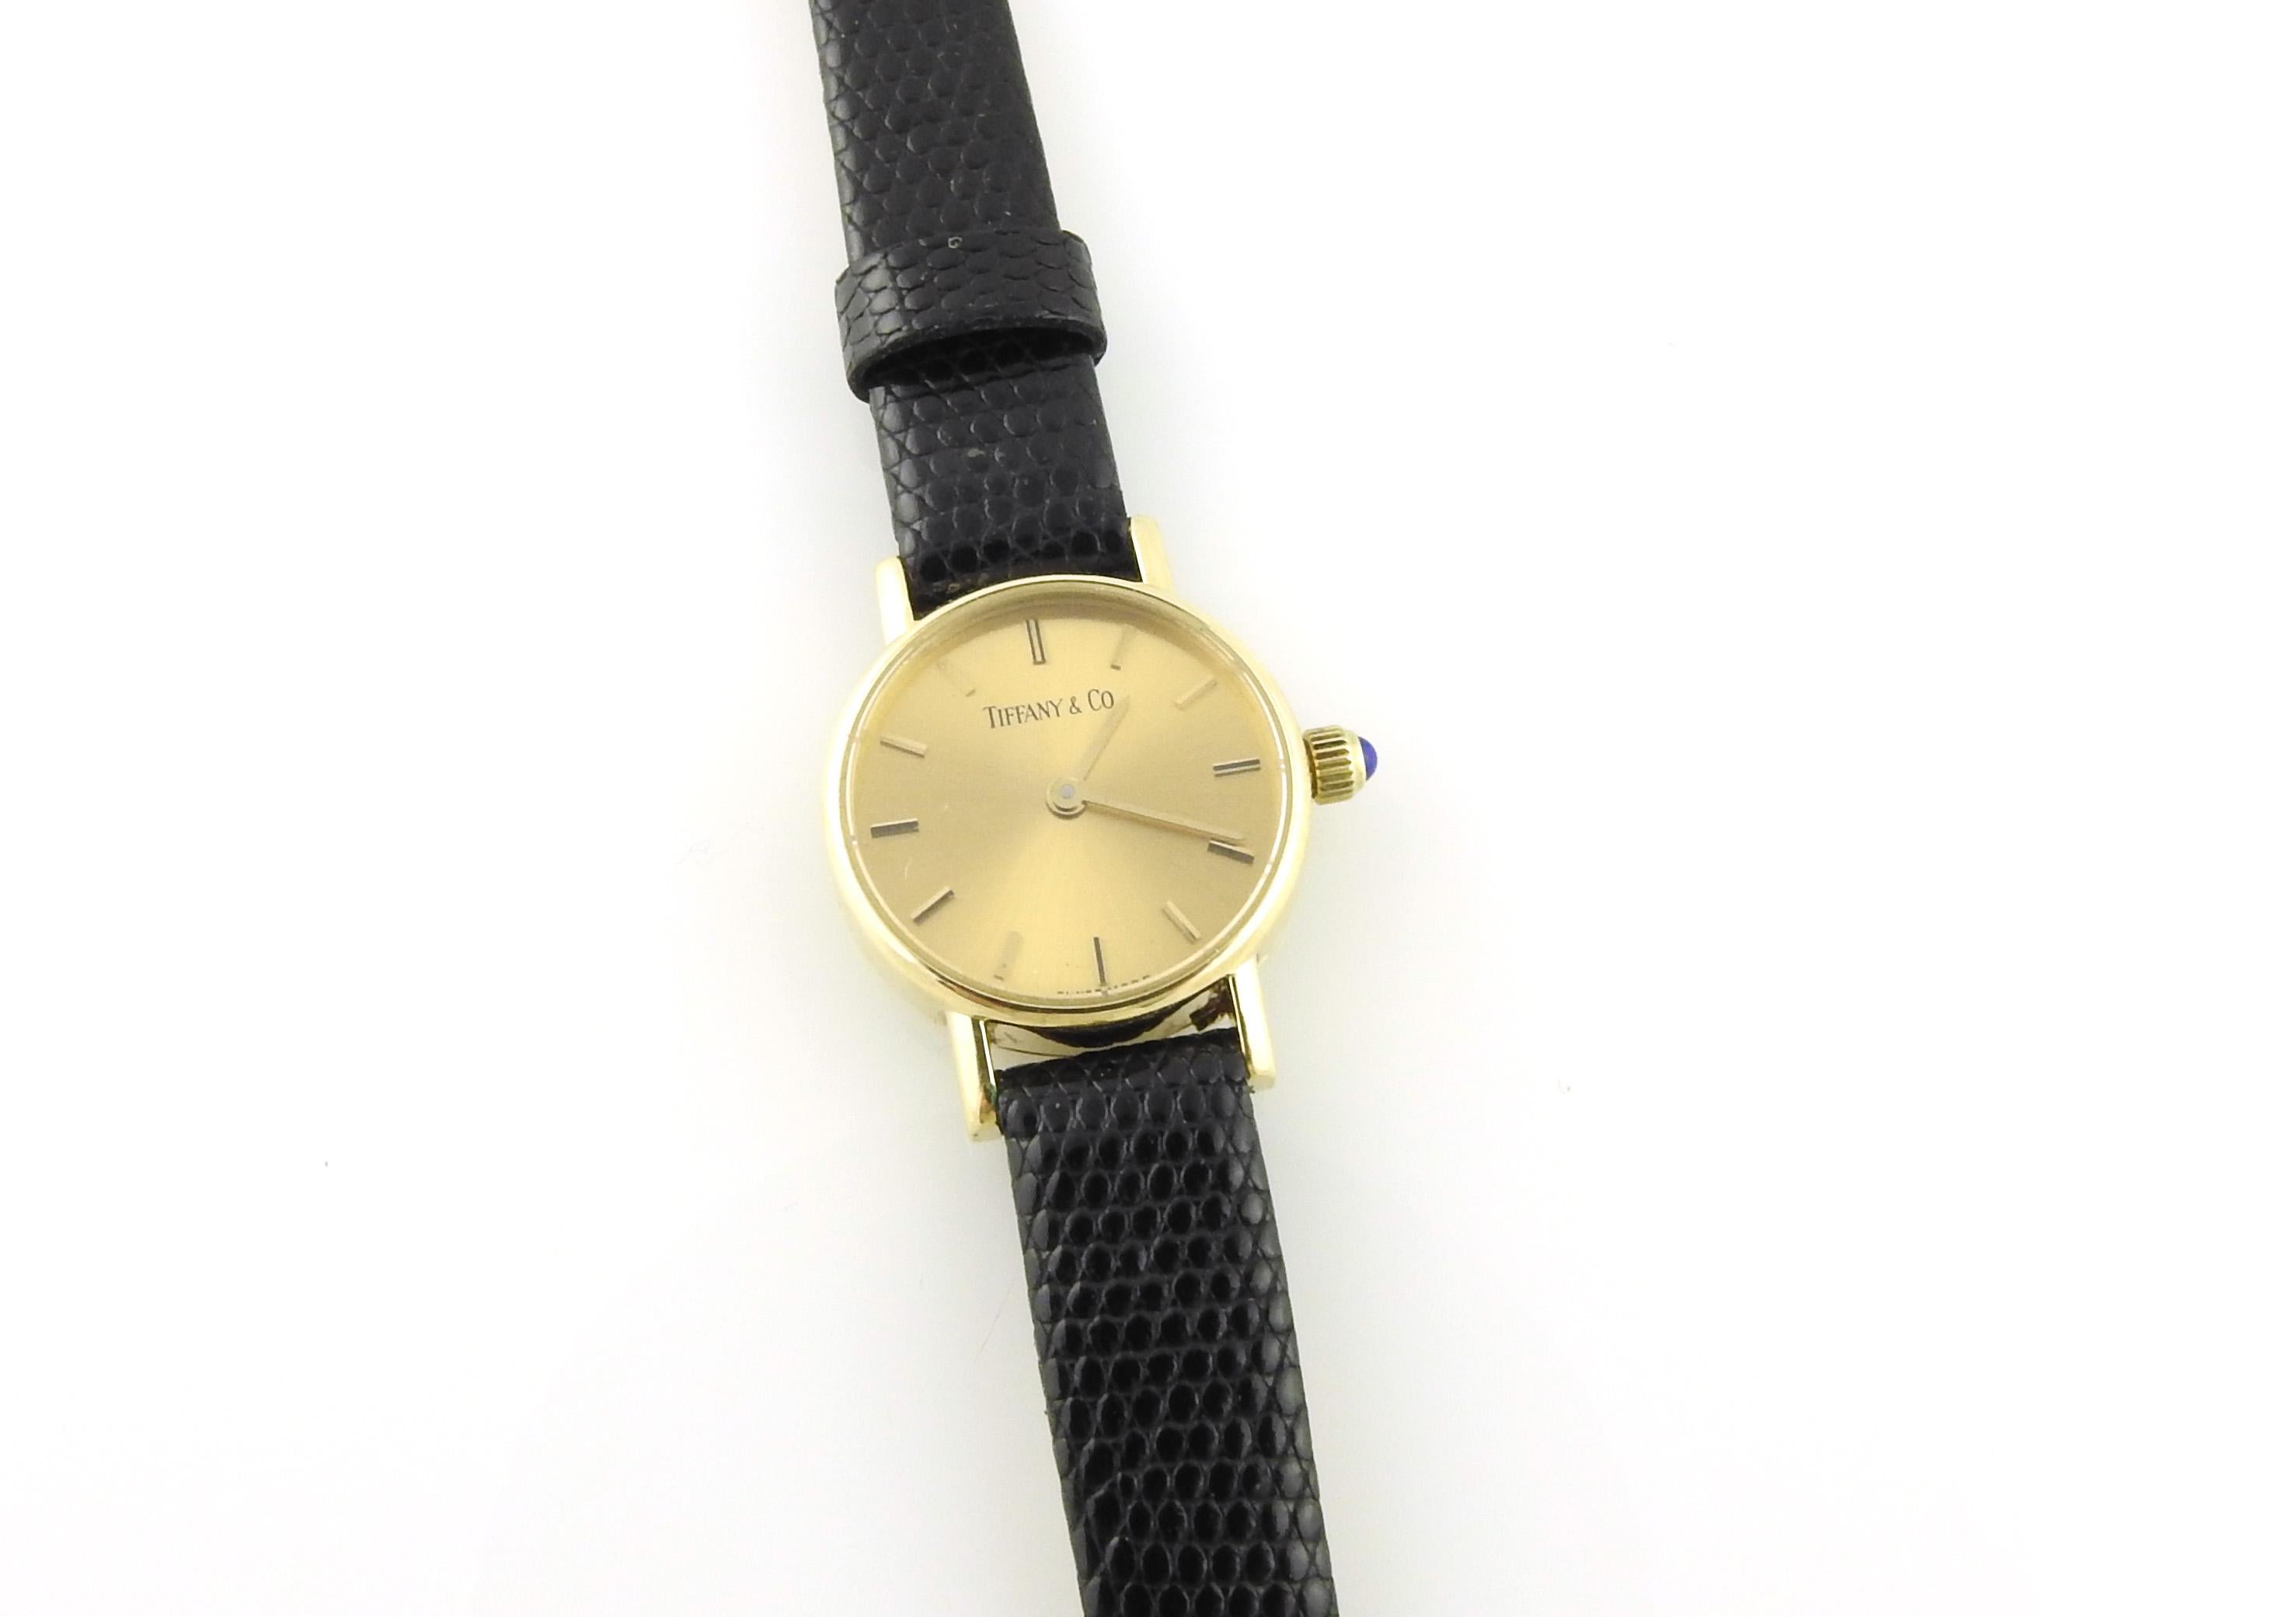 Tiffany & Co. 14K Yellow Gold Petite Ladies Watch

This vintage classic Tiffany & Co. Ladies watch is set in 14K yellow gold.

Case is approx. 19mm in diameter with a gold dial and gold markers. Gold crown with cabochon sapphire.

Band is NOT